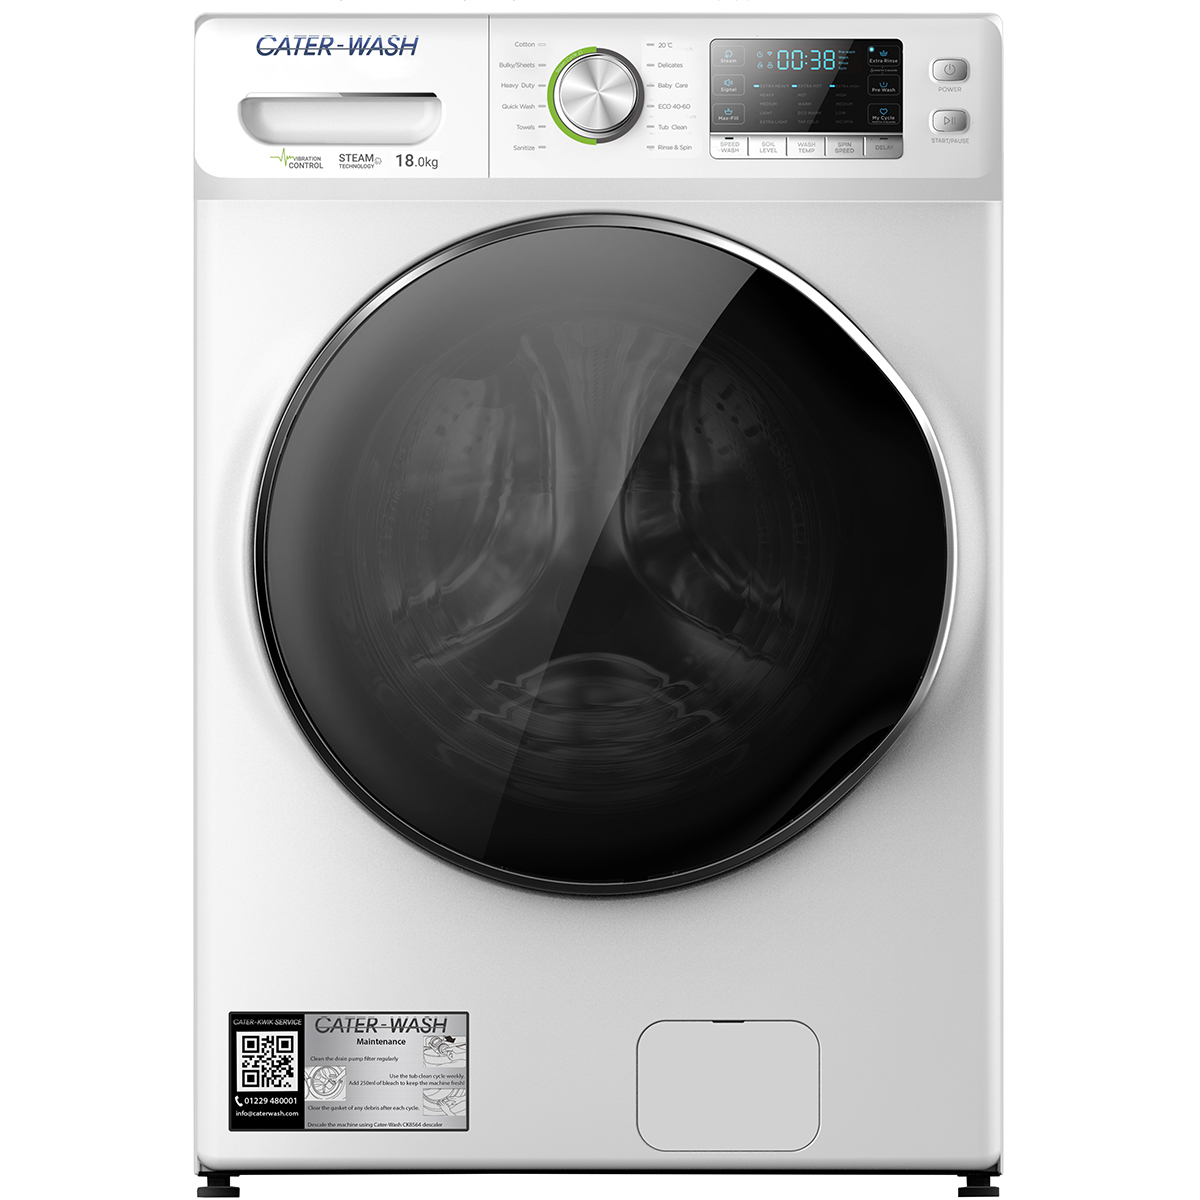 Cater-Wash CW8518 18kg Heavy Duty Washing Machine - FREE NEXT DAY DELIVERY*